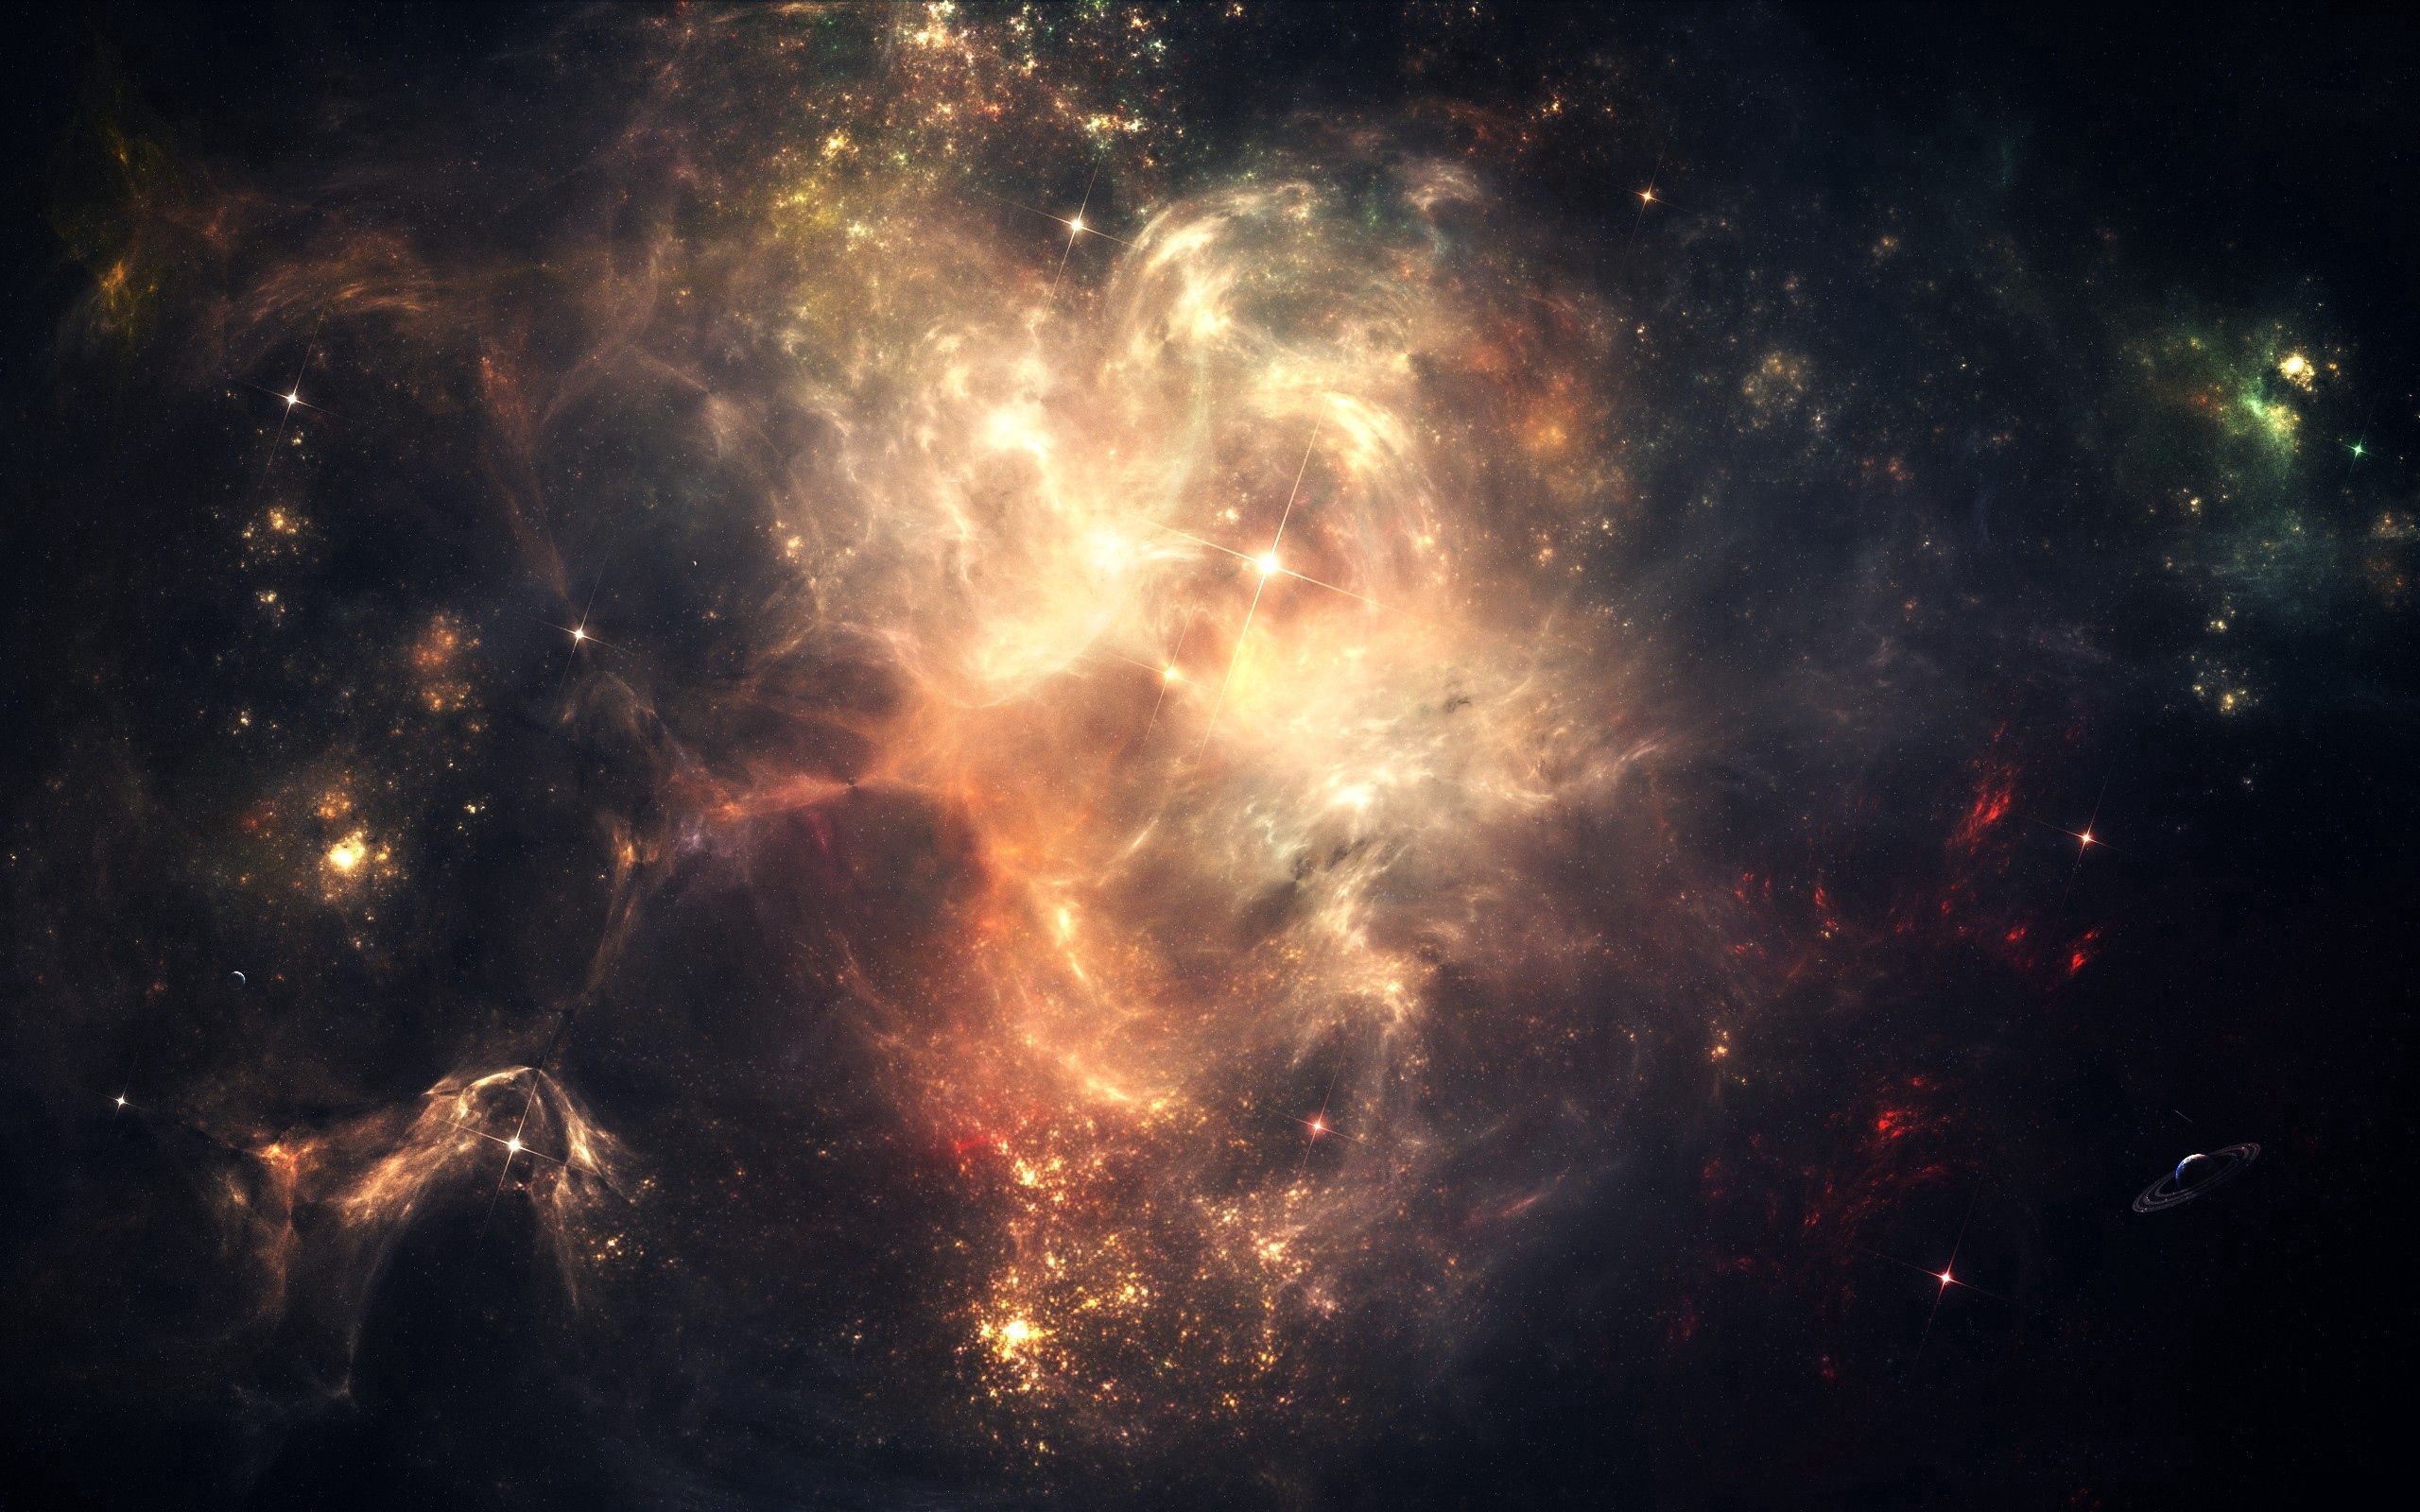 62036 download wallpaper dark, sky, universe, stars screensavers and pictures for free